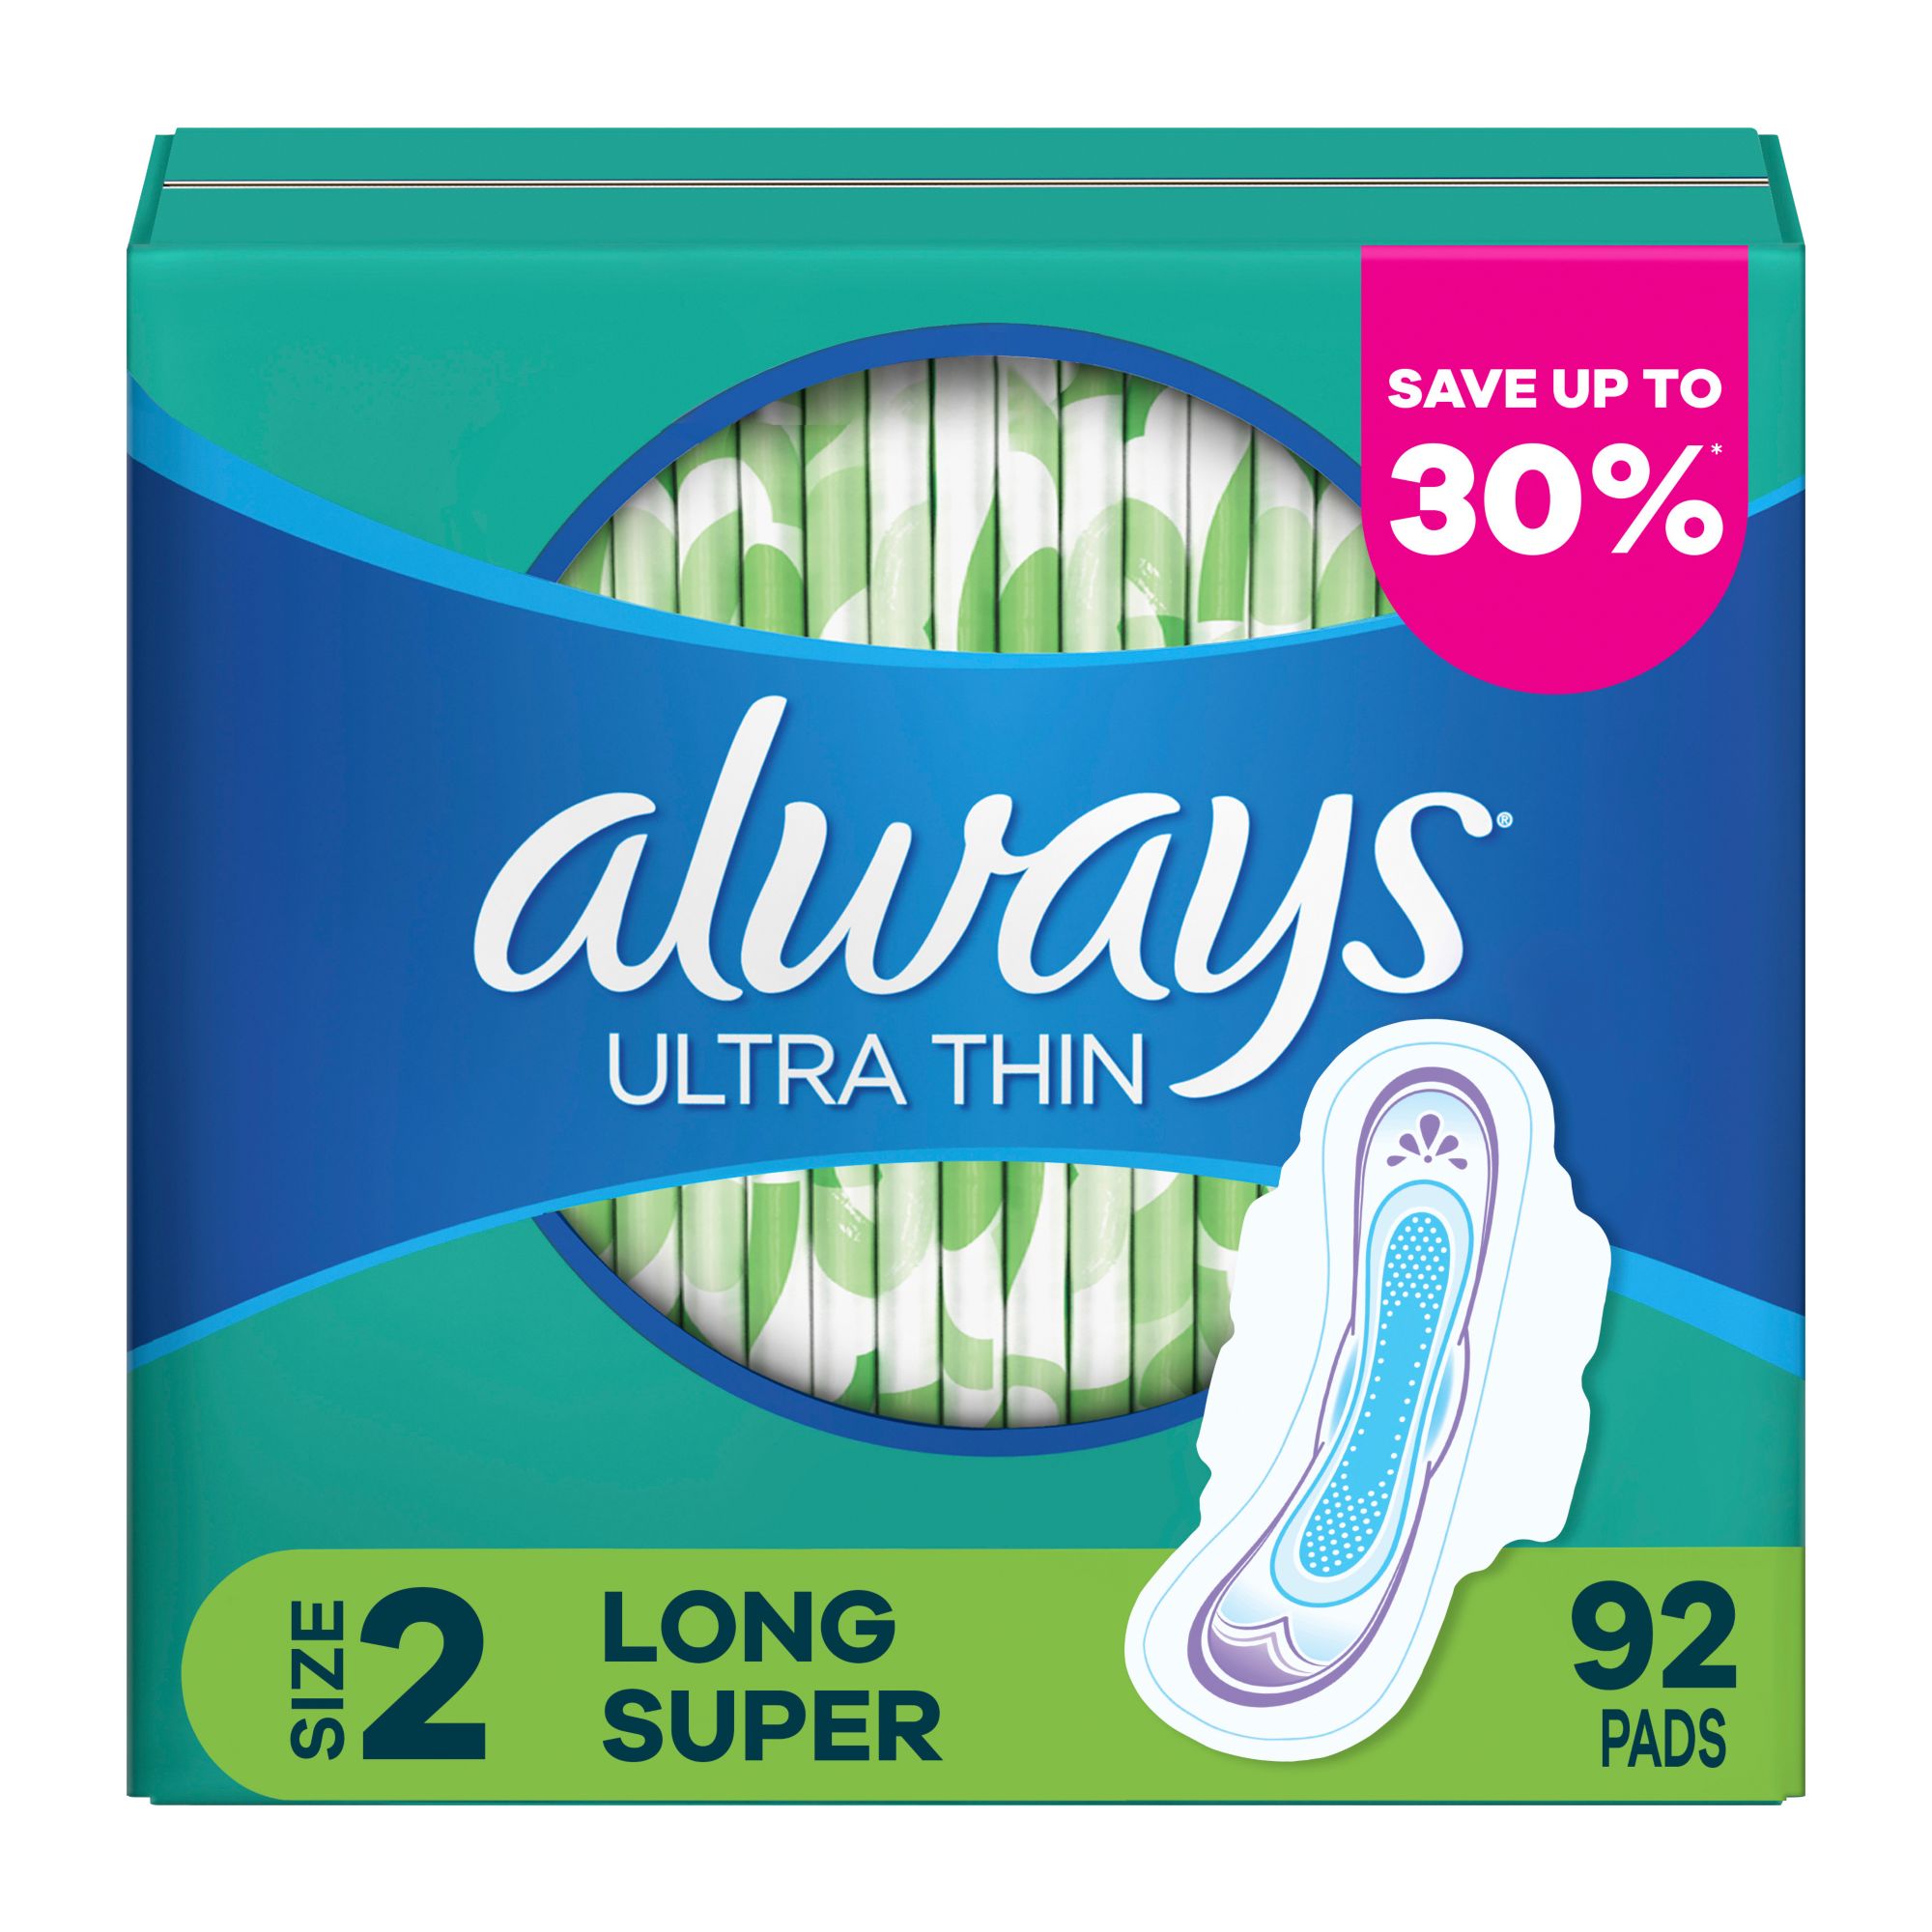 Always Anti-Bunch Xtra Protection Daily Liners Long Unscented (200 Count)